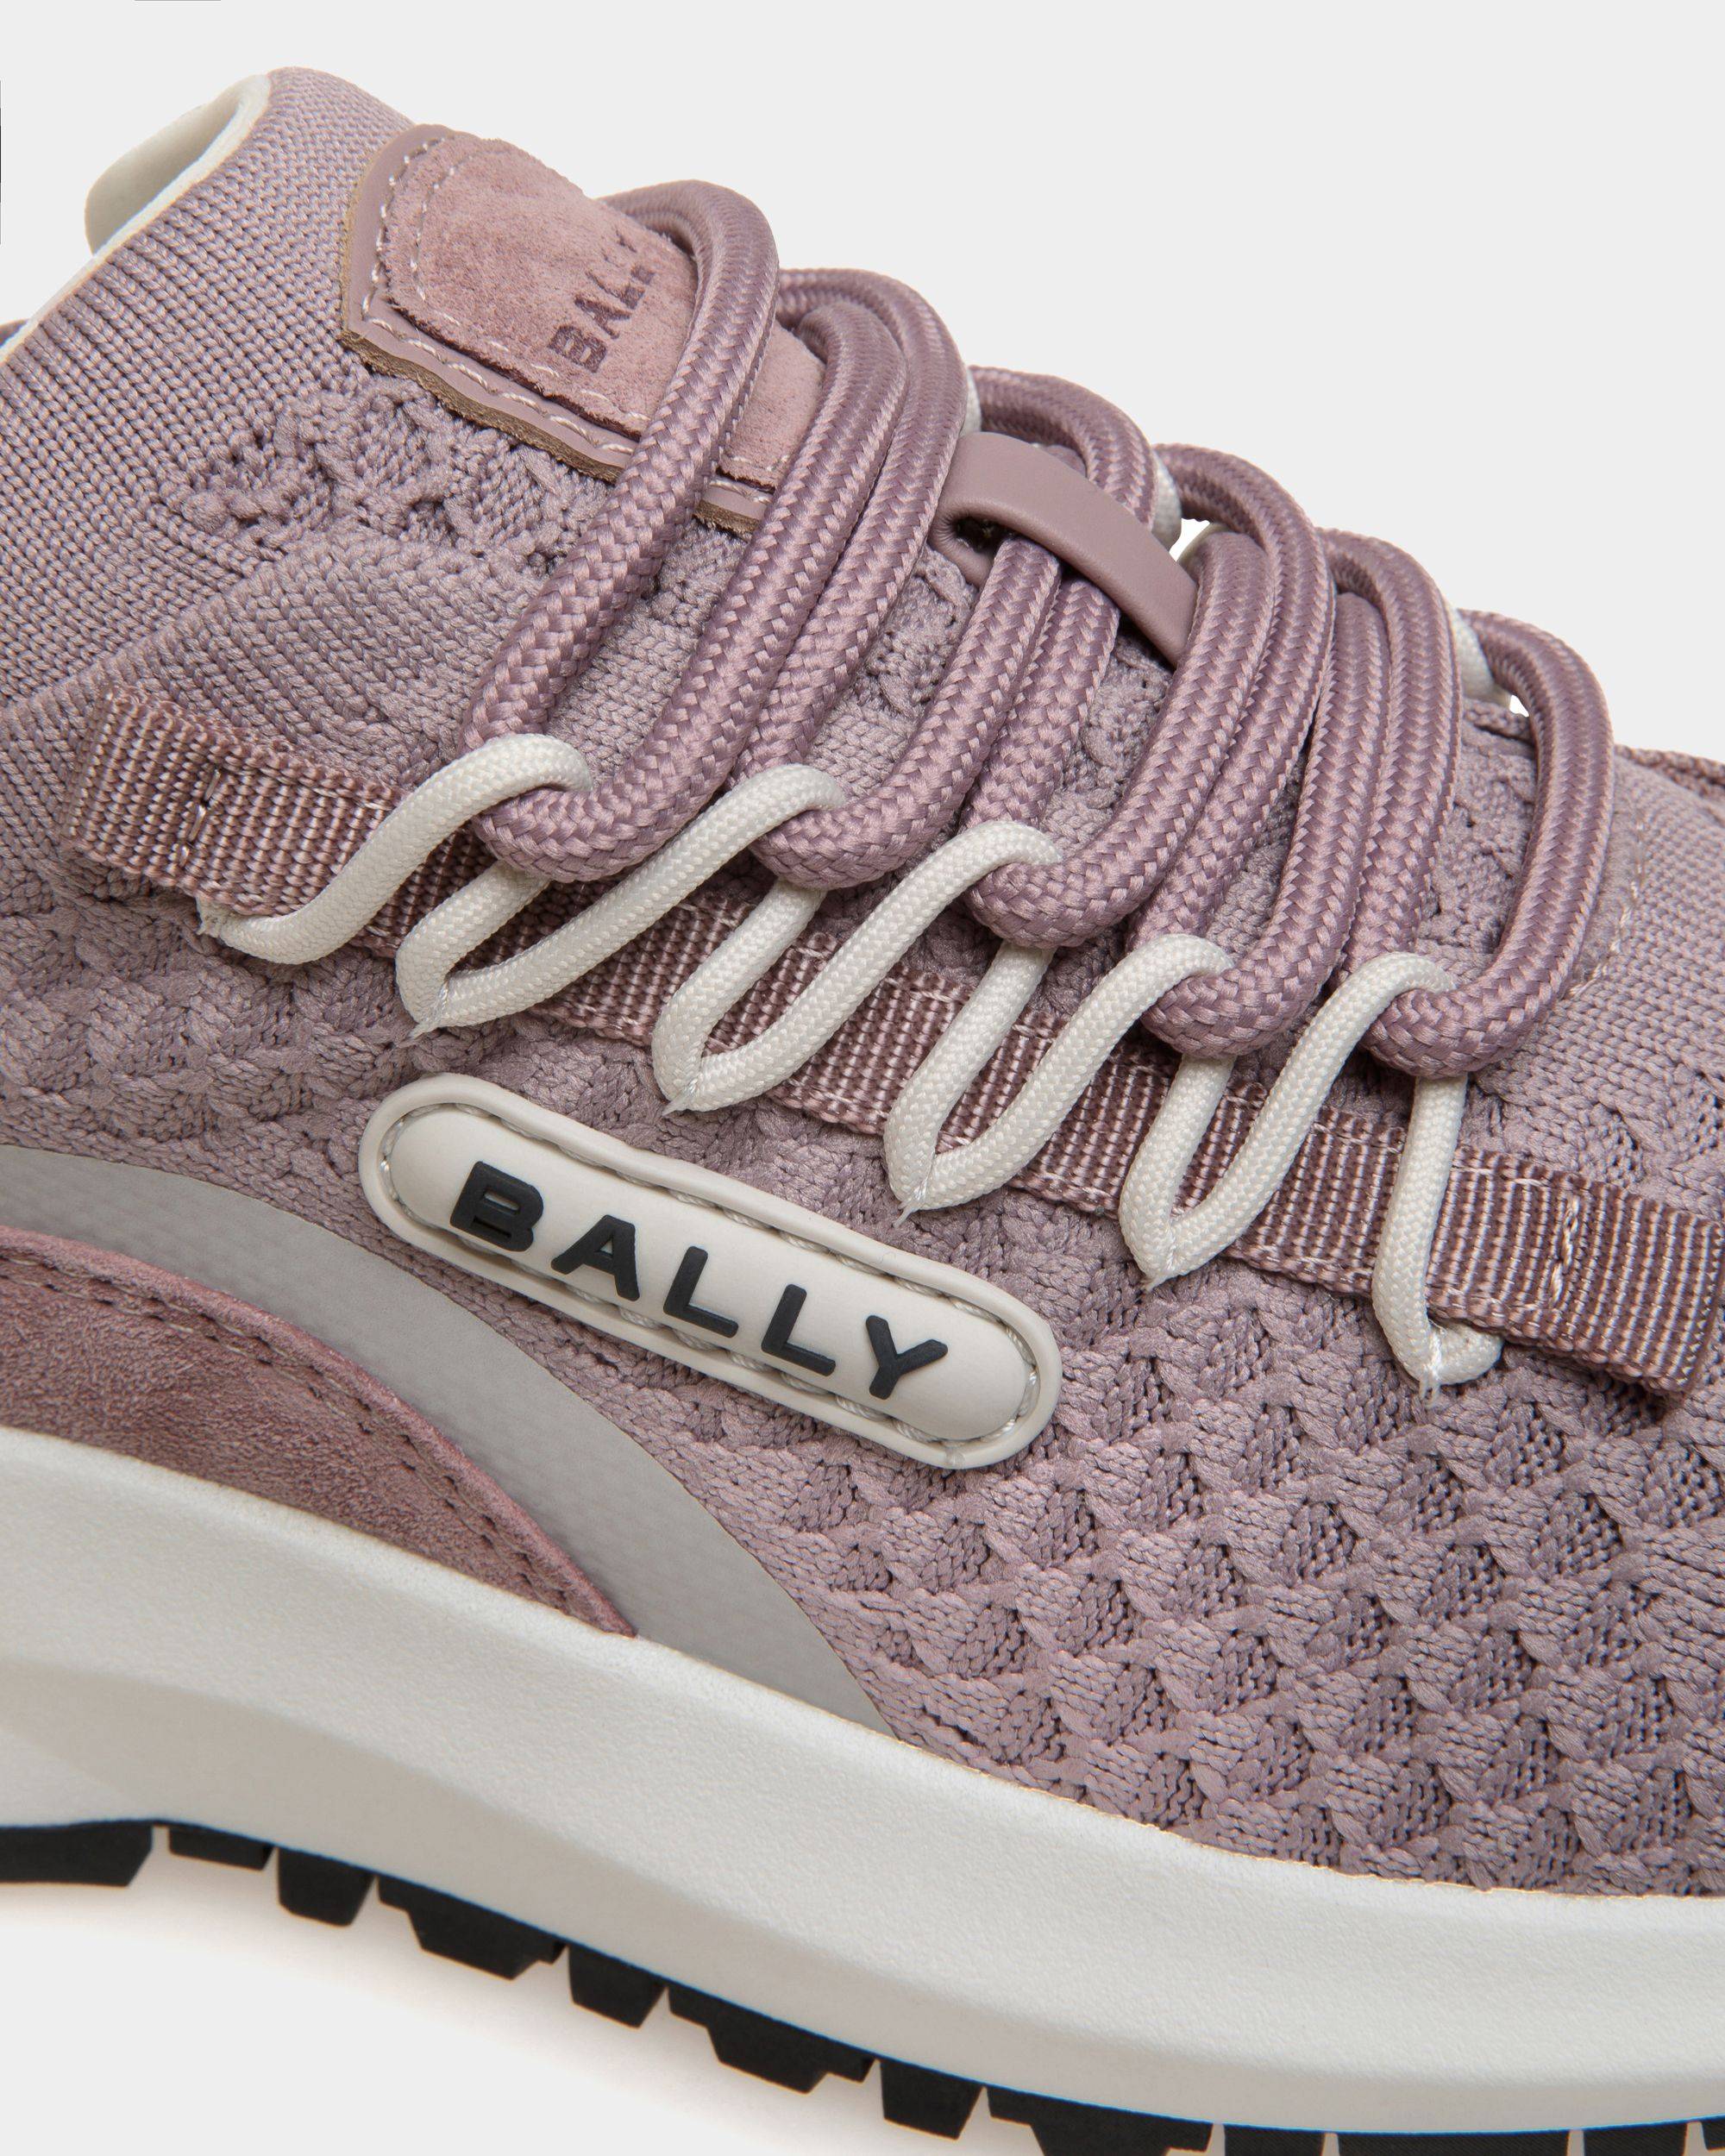 Outline | Women's Low-top Sneaker in Lilac Knit Fabric | Bally | Still Life Detail